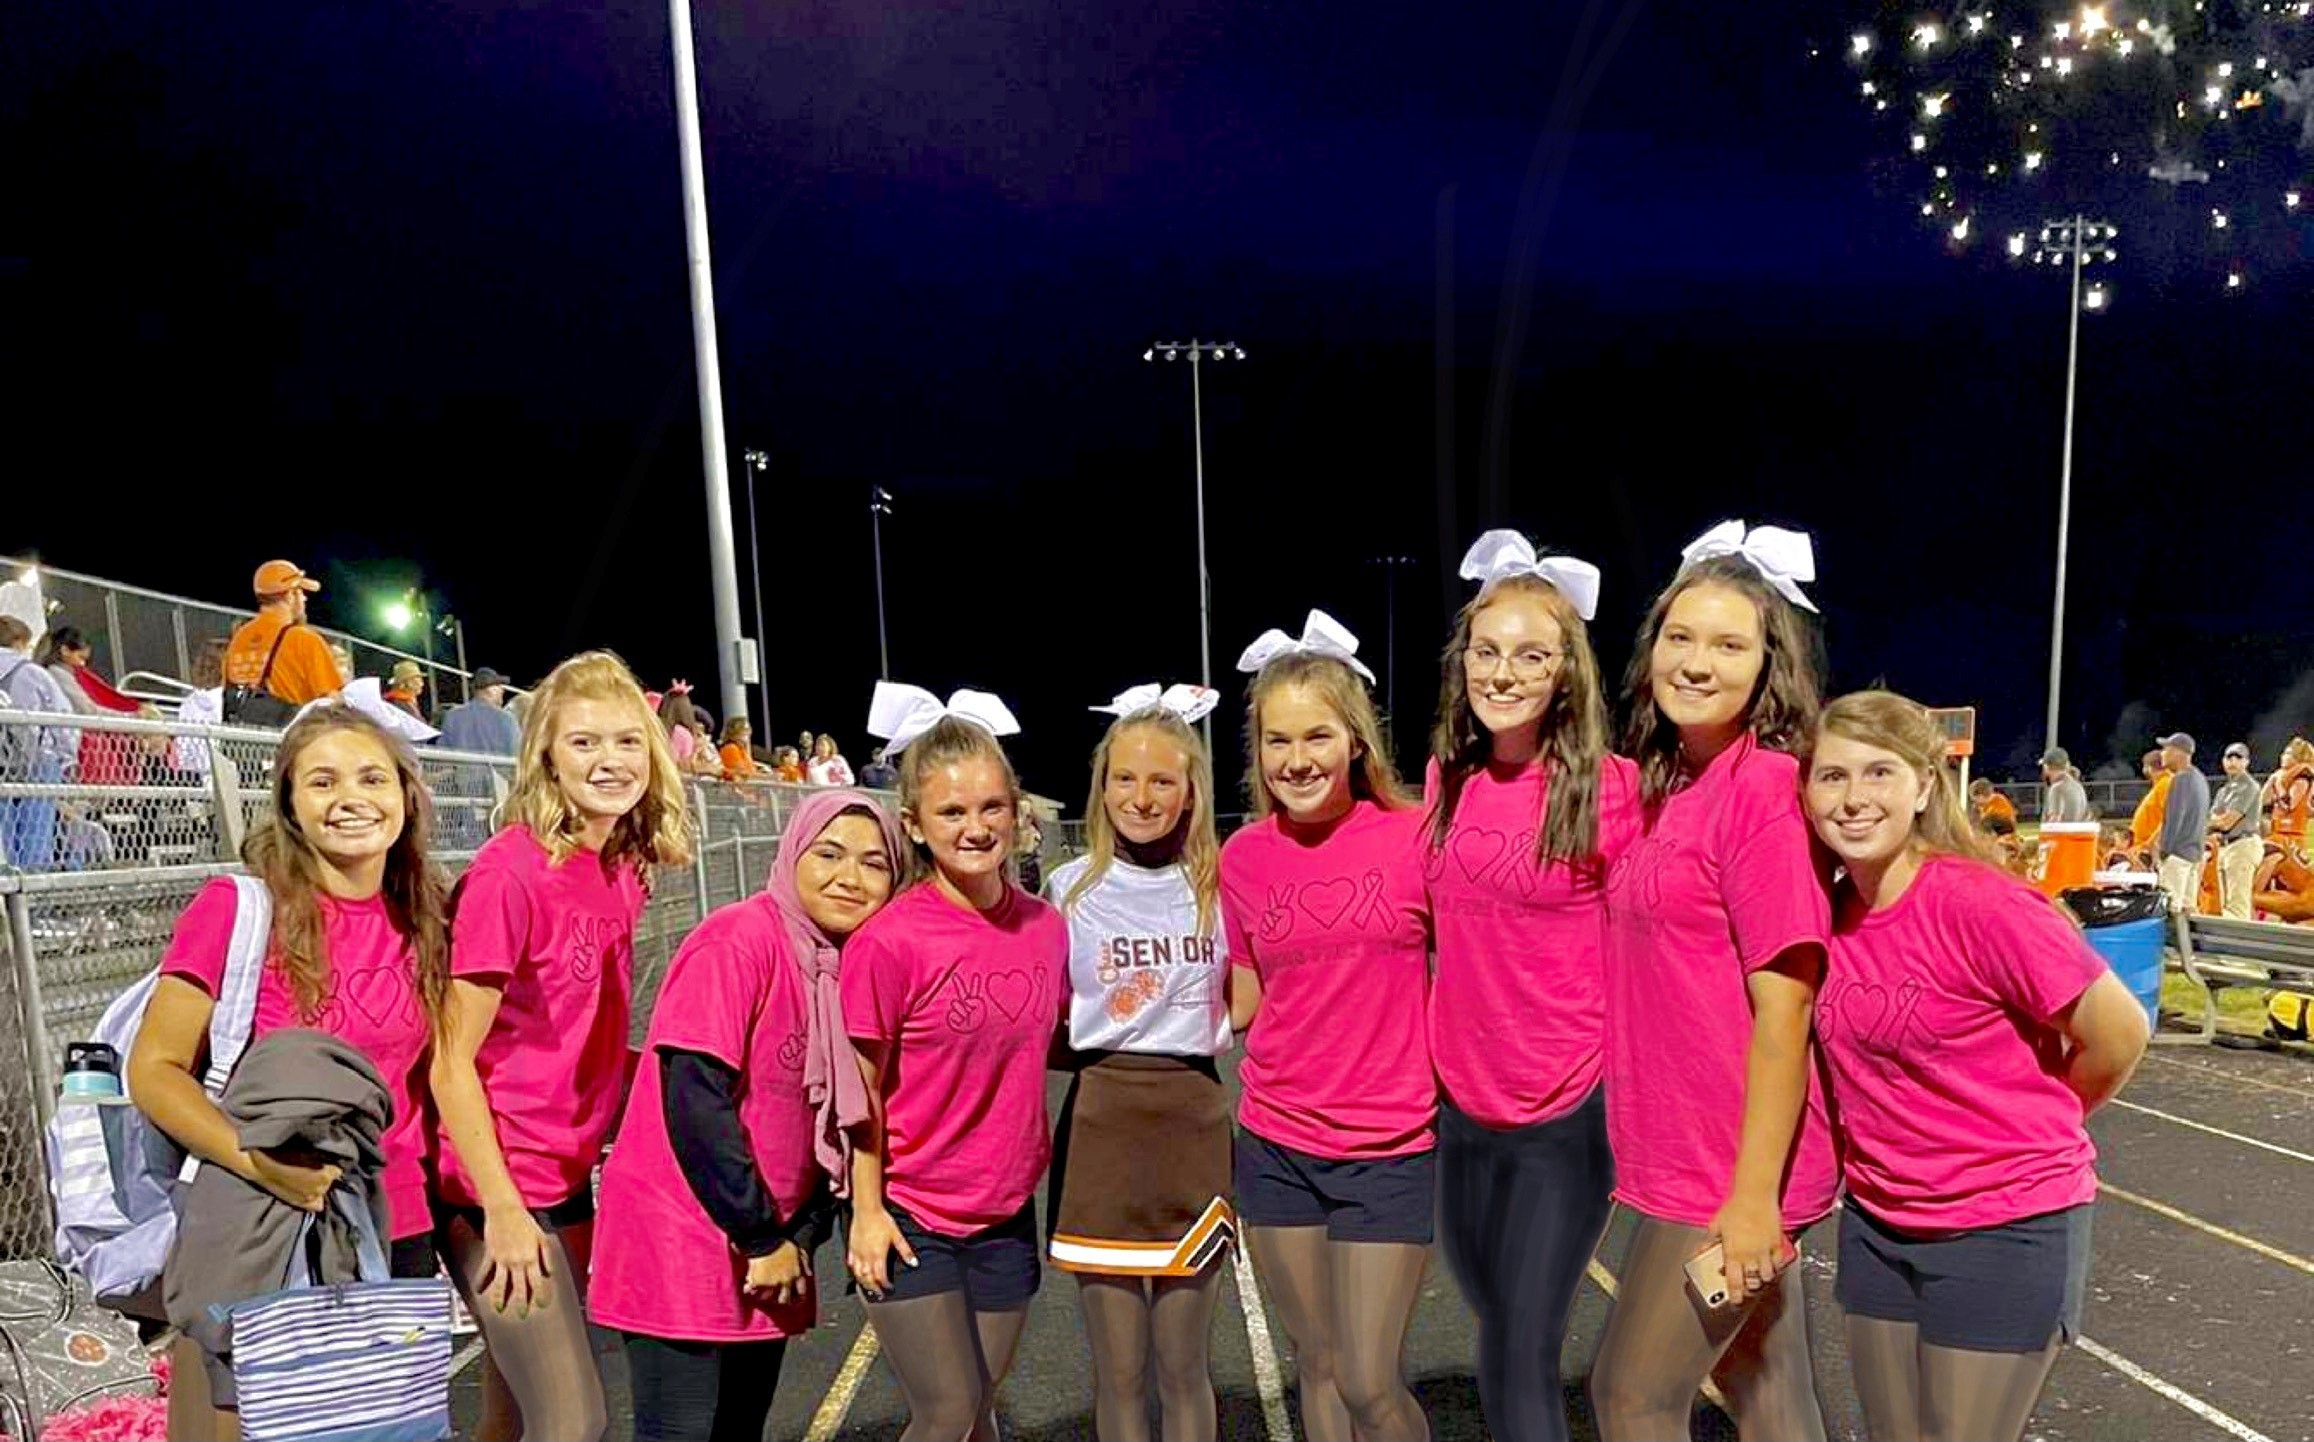 Fatma Ayad 21 With Her Cheerleading Team At Homecoming Game